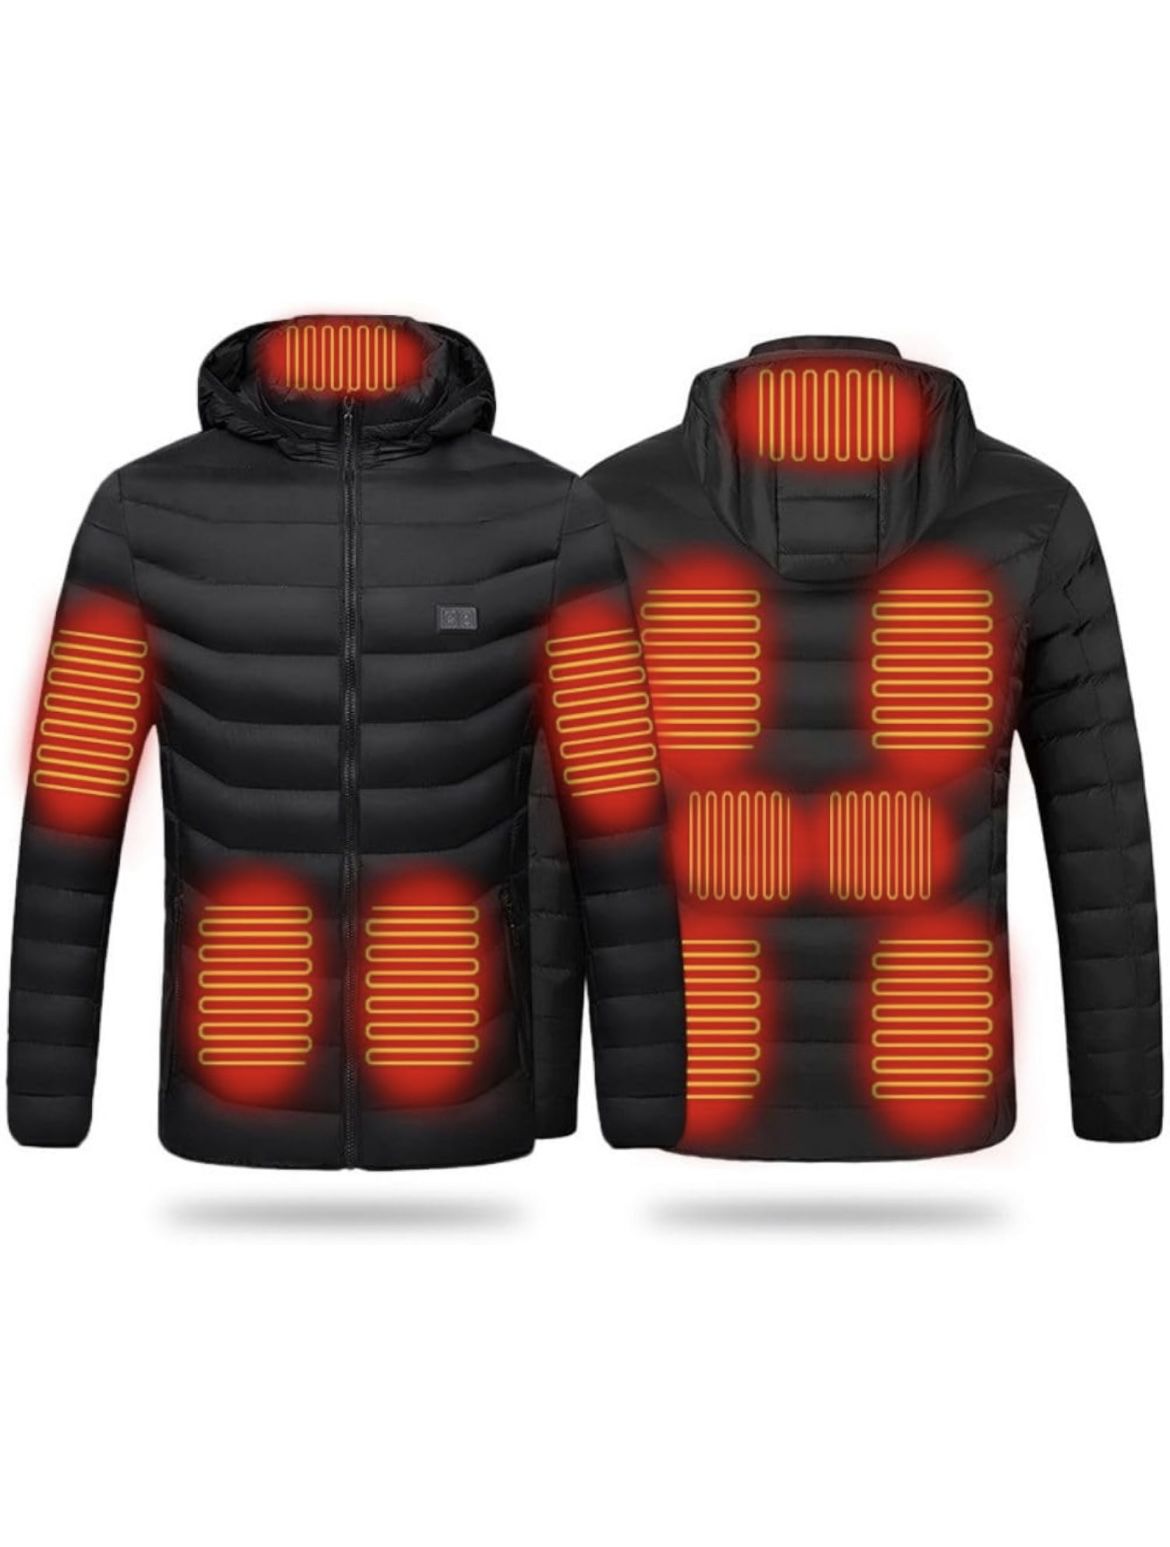 Super Therma - Heated Jacket for Women and Men with Battery Pack 5V 11 Heating Zones Heated Coat Detachable Hood